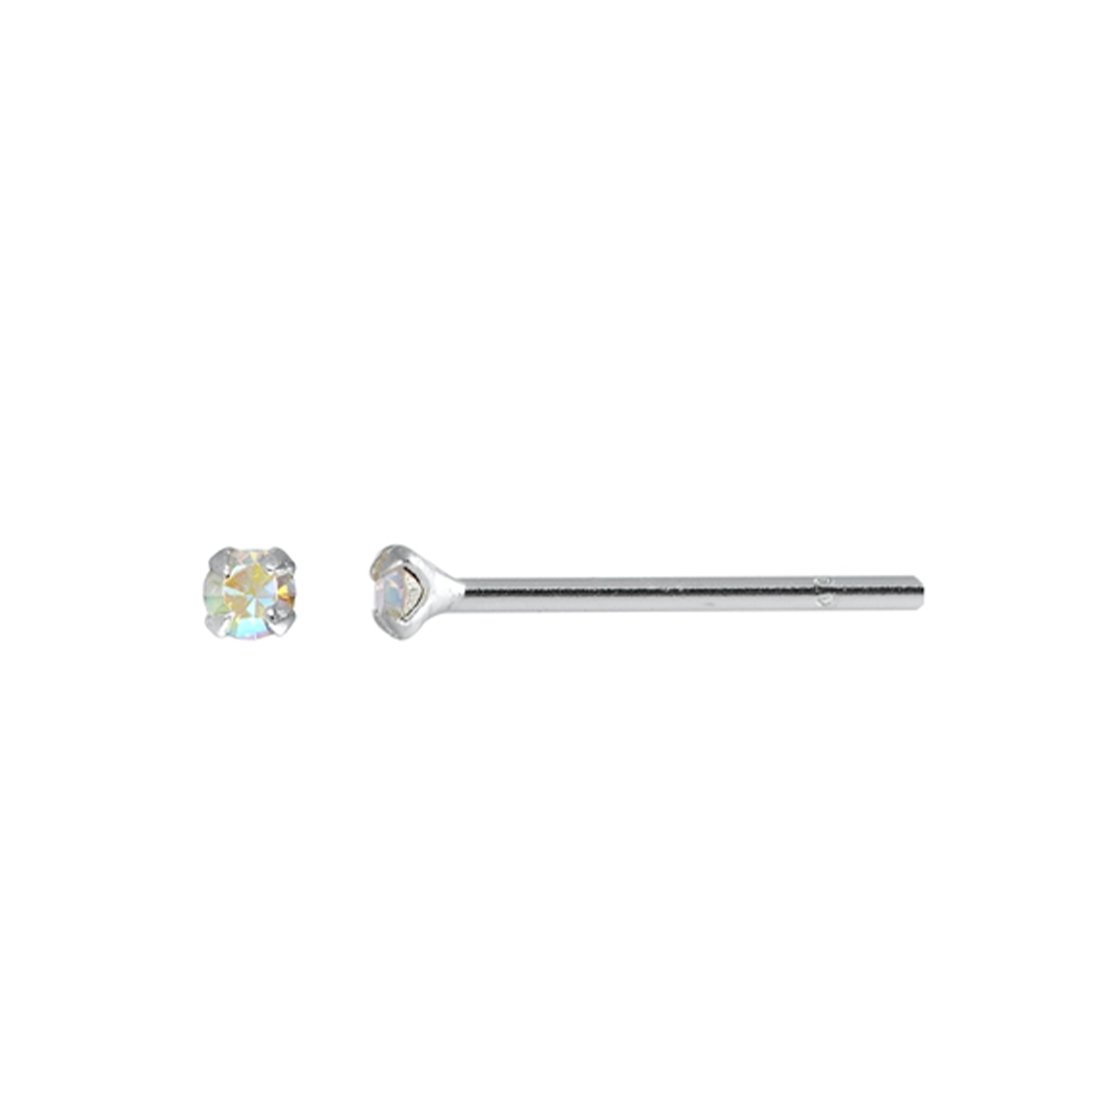 AB Crystal Simulated Cubic Zirconia Nose Stud 925 Sterling Silver-(20 Nose Studs in a Box)